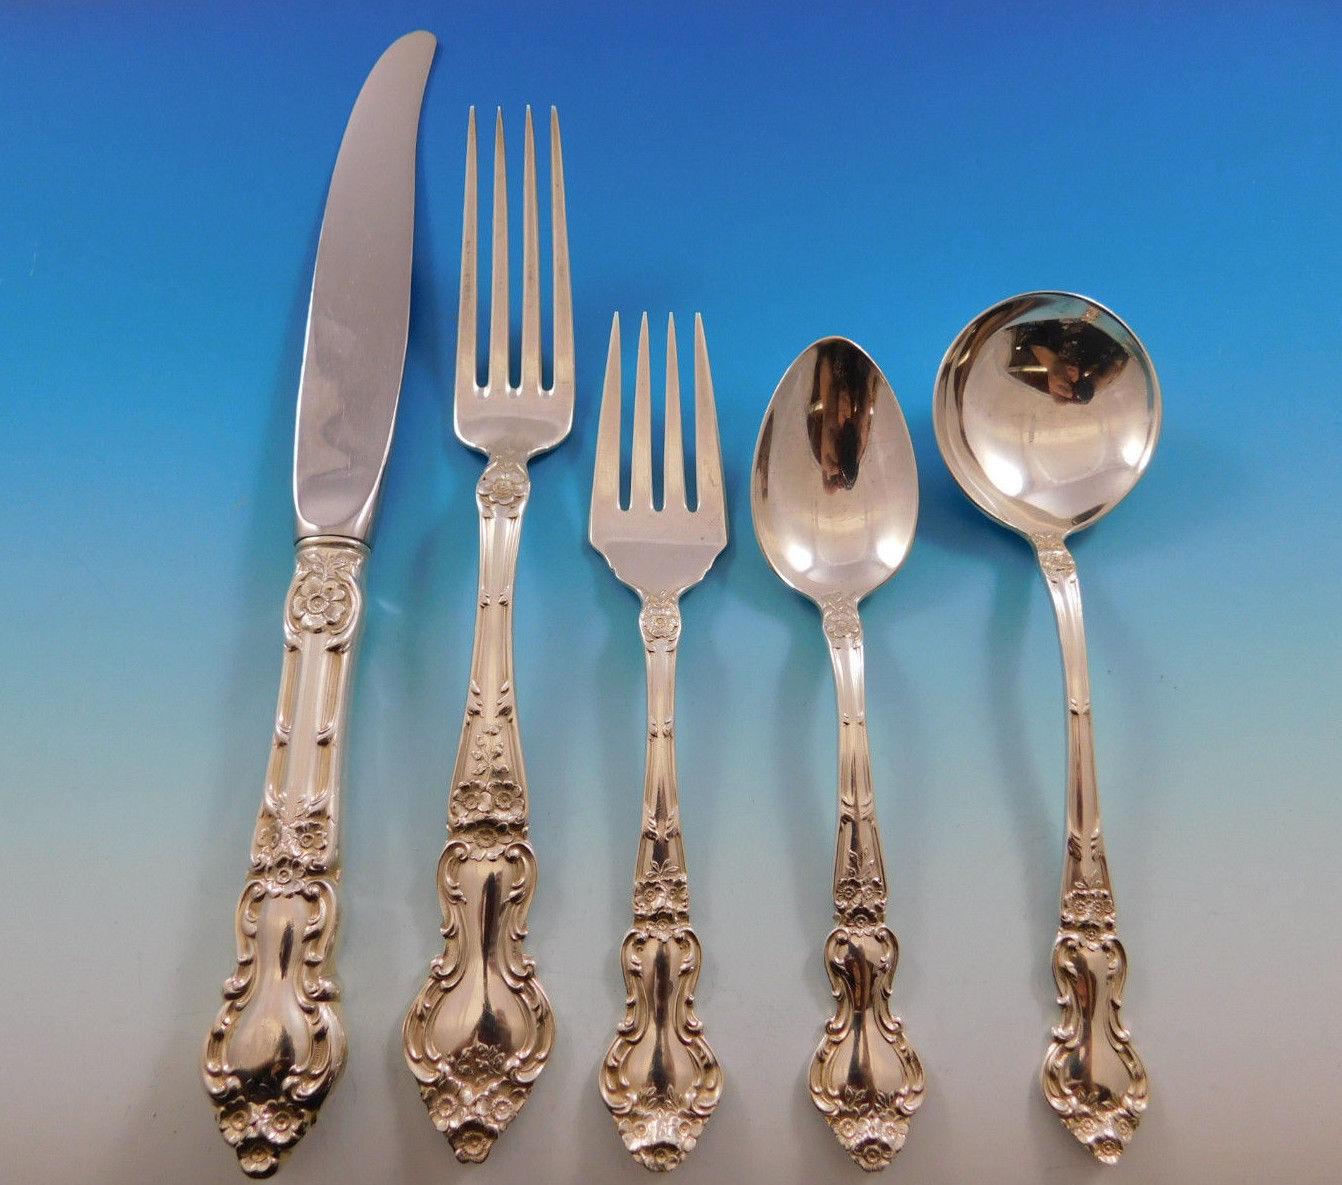 Large dinner size meadow rose by Wallace Sterling silver flatware set - 95 pieces. This set includes:

18 dinner size knives, 9 5/8